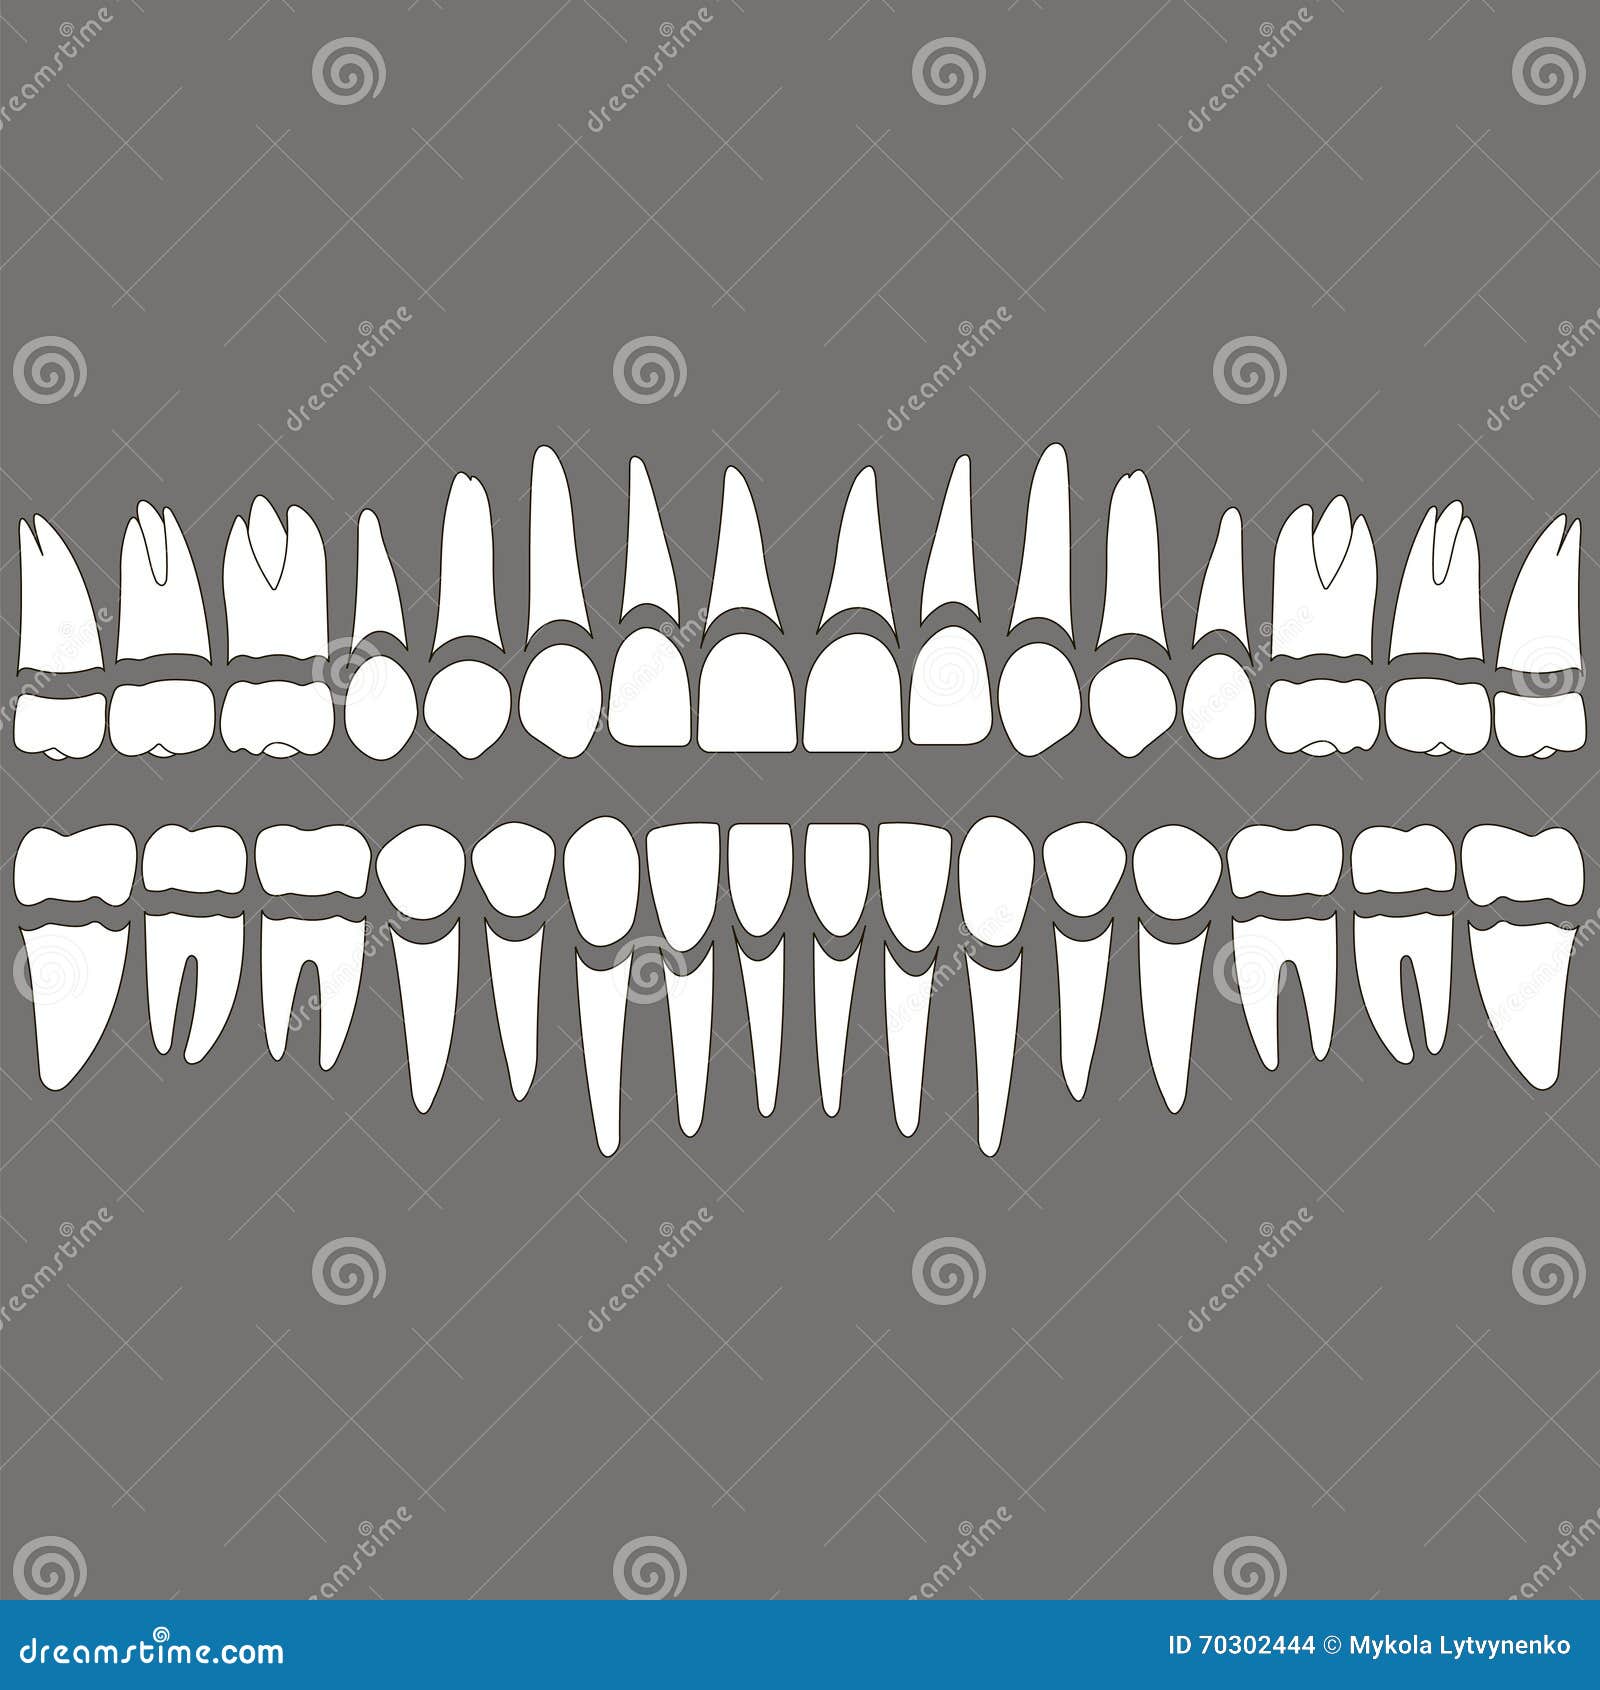 dentition teeth and roots